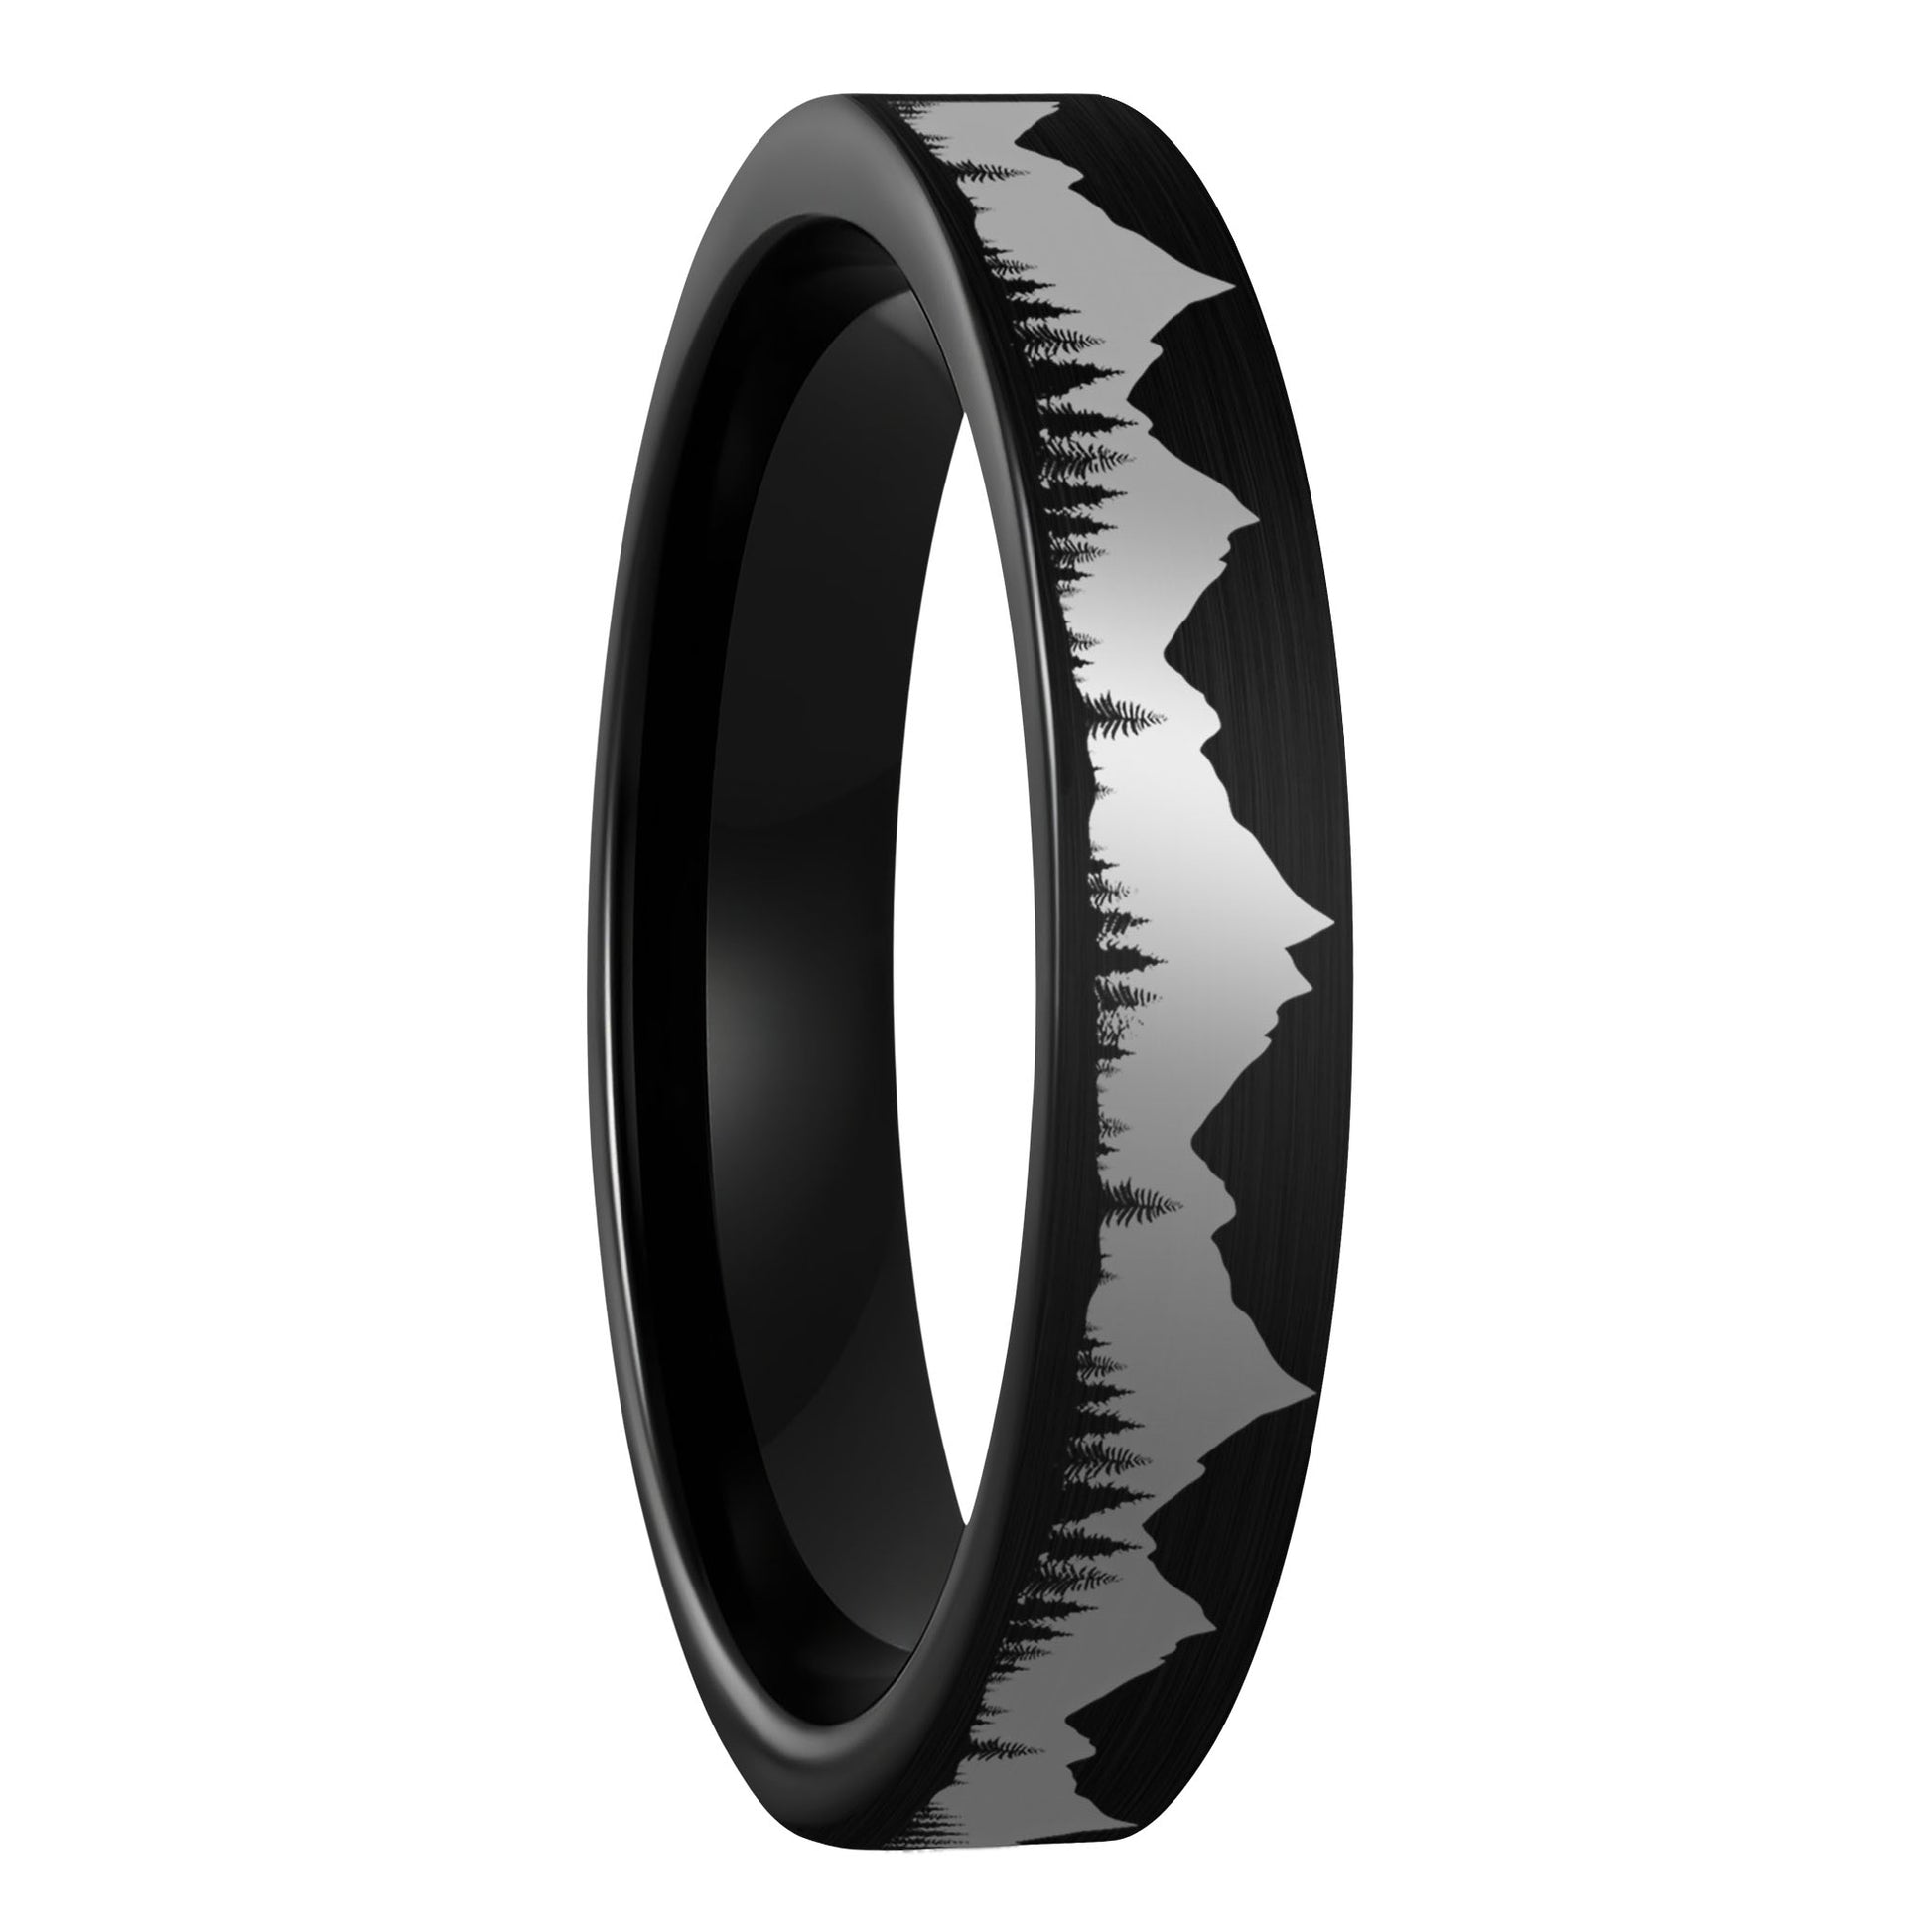 A treeline mountains brushed black tungsten women's wedding band displayed on a plain white background.